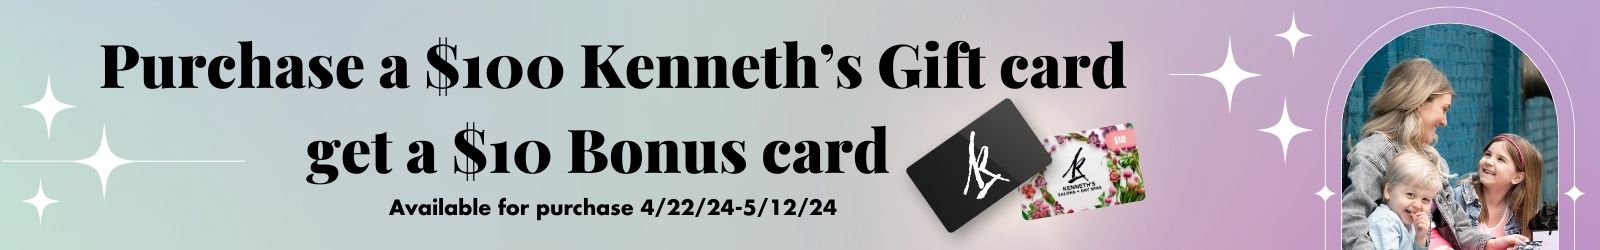 Purchase a 100 Dollar Kenneth's Gift Card and Get a $10 Bonus Card - Available for Purchase 04/22/2024 to 05/12/2024